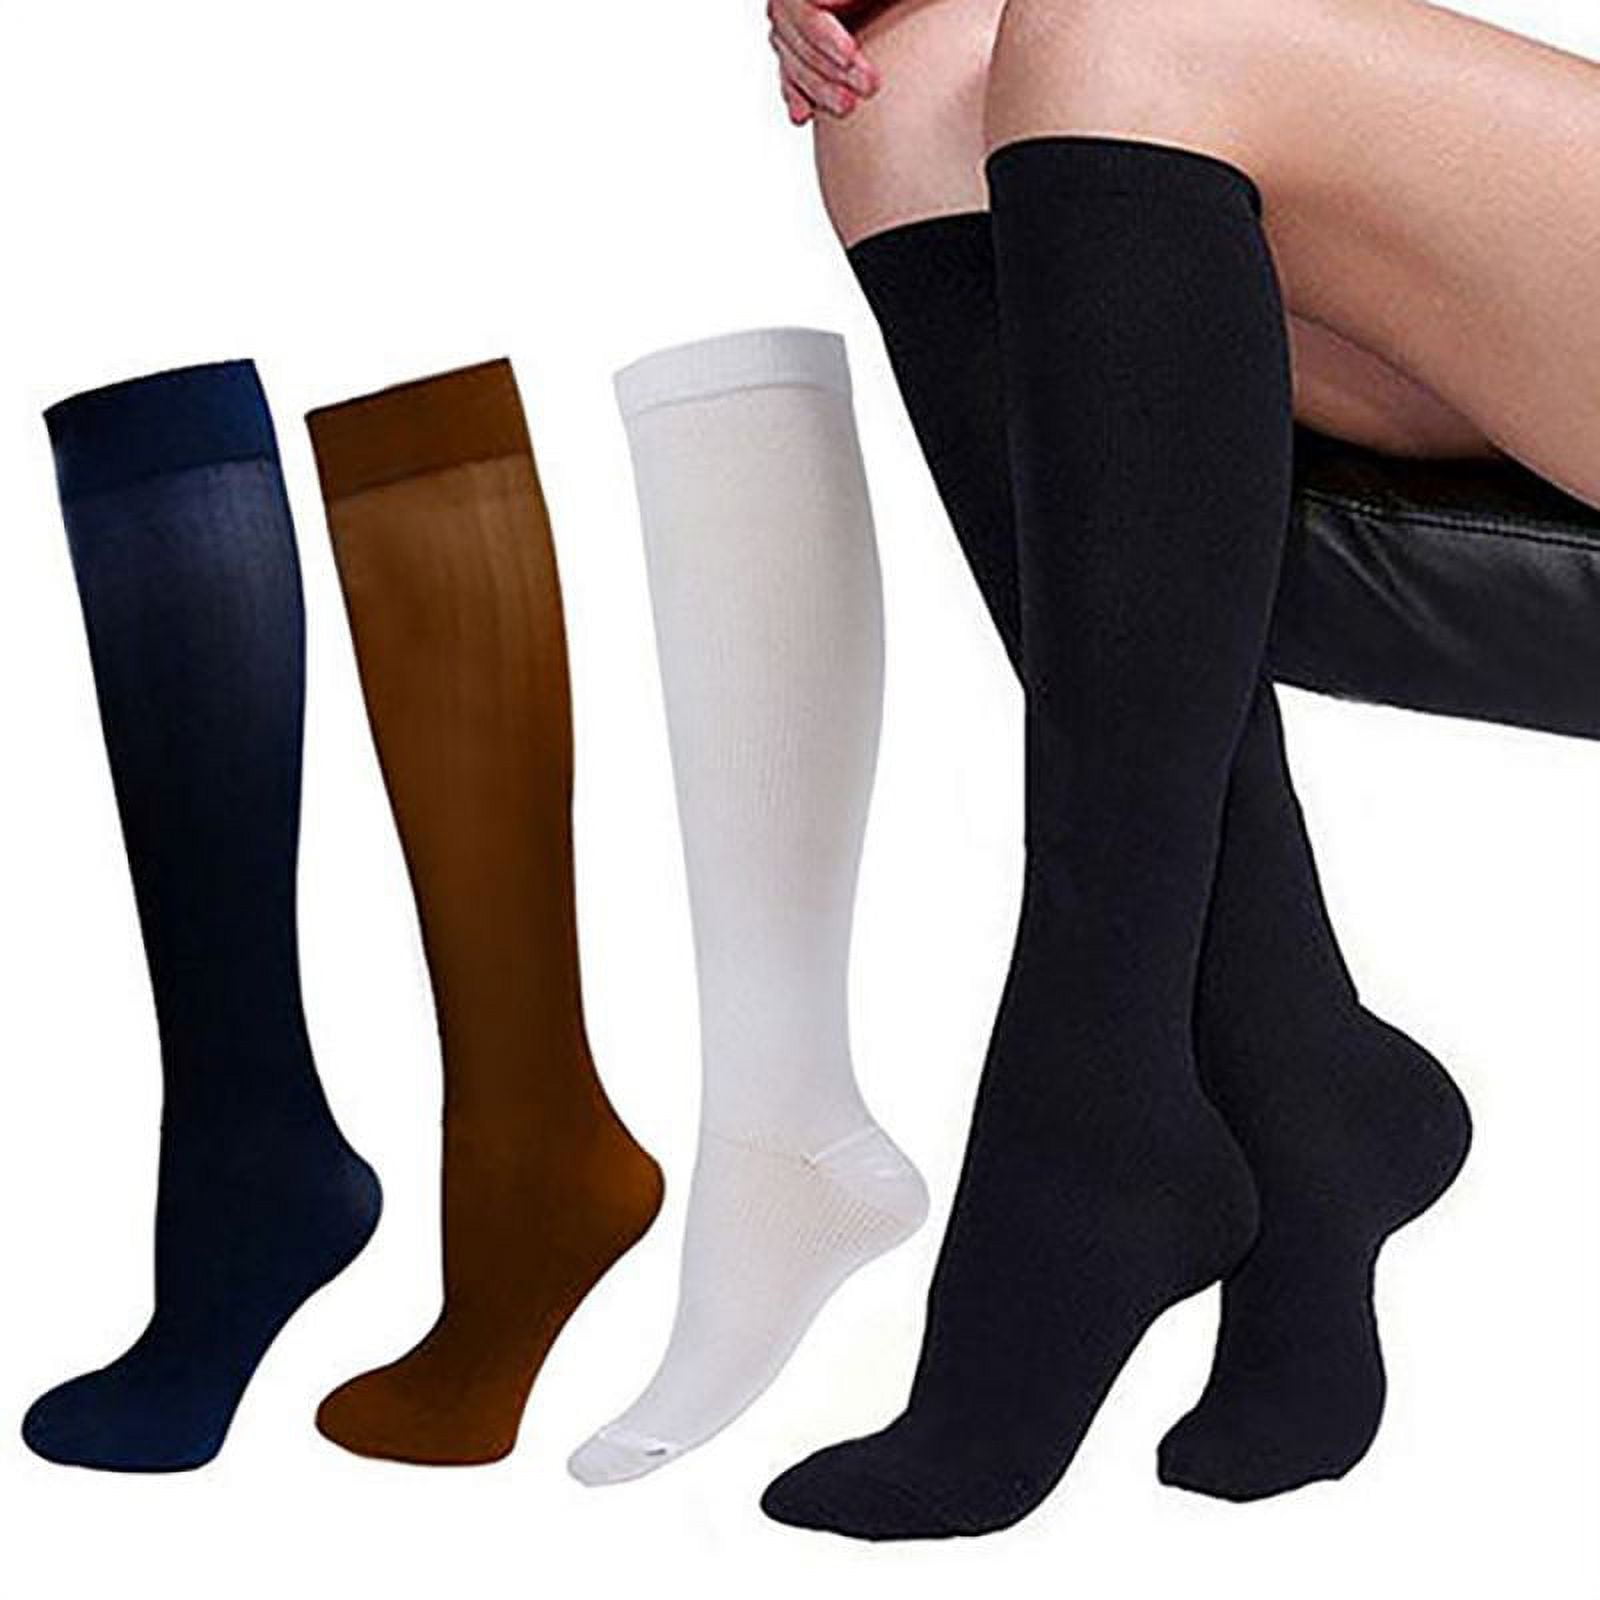 Casual Thigh-High Compression Stockings Varicose Vein Stocking